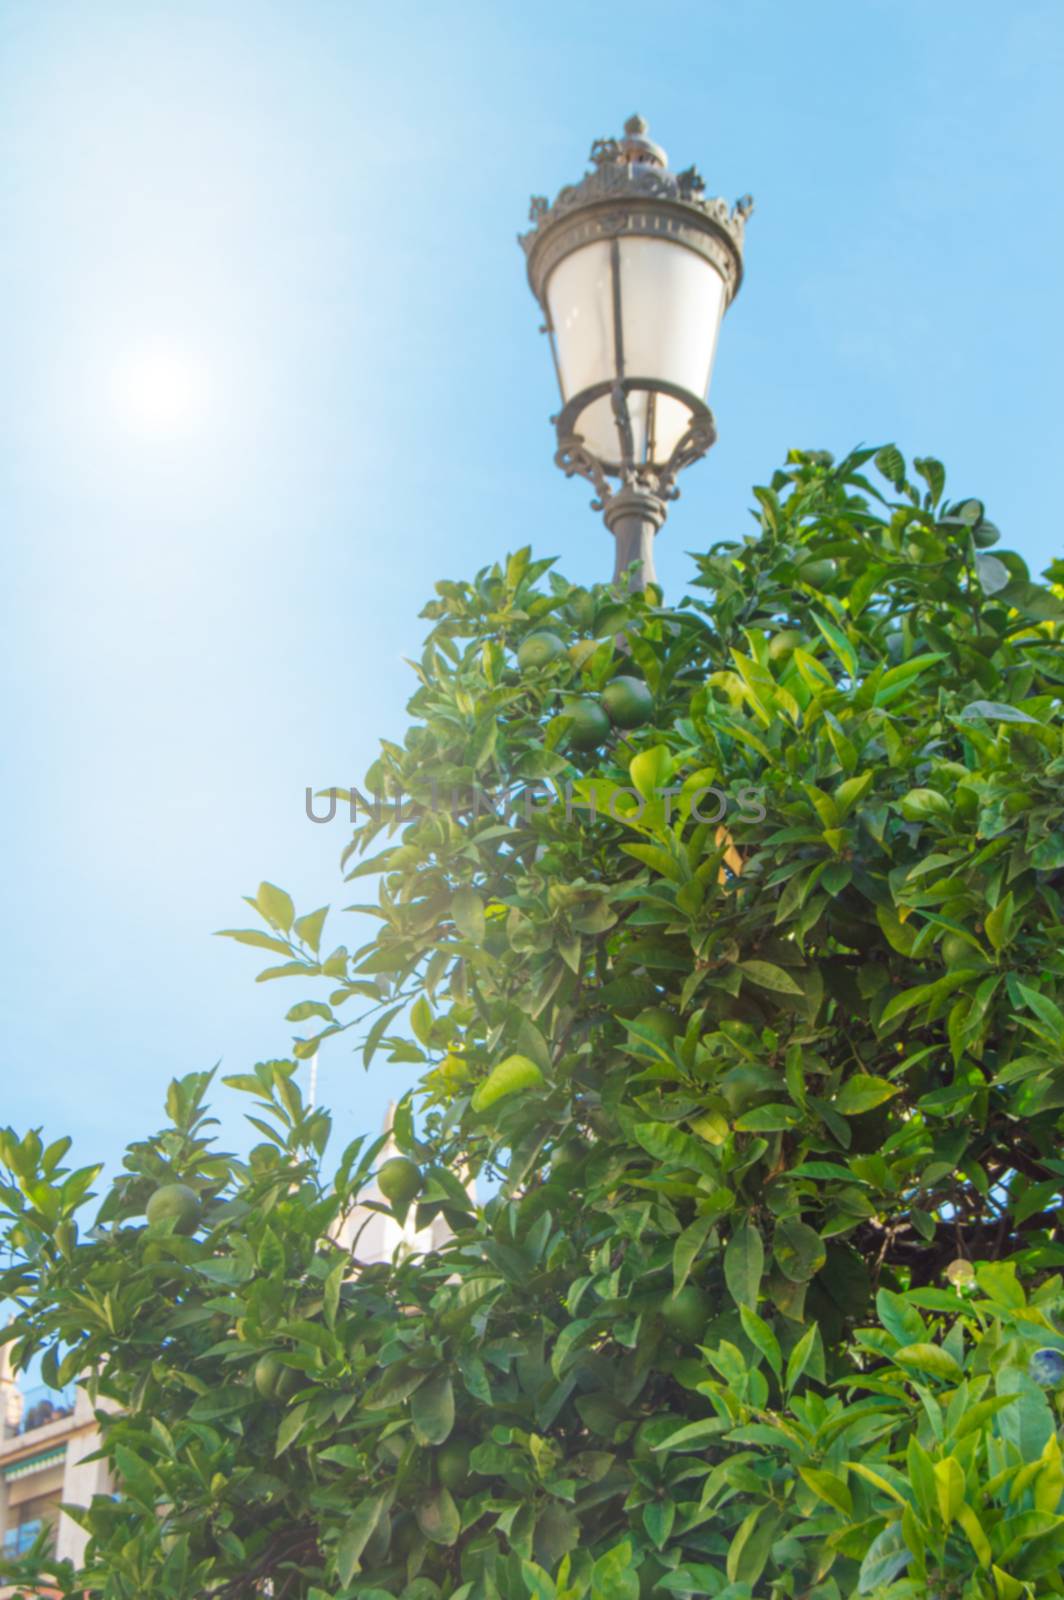 Beautiful lamppost and tangerine tree on the background of the blue sky with sunlight, a copy space by claire_lucia